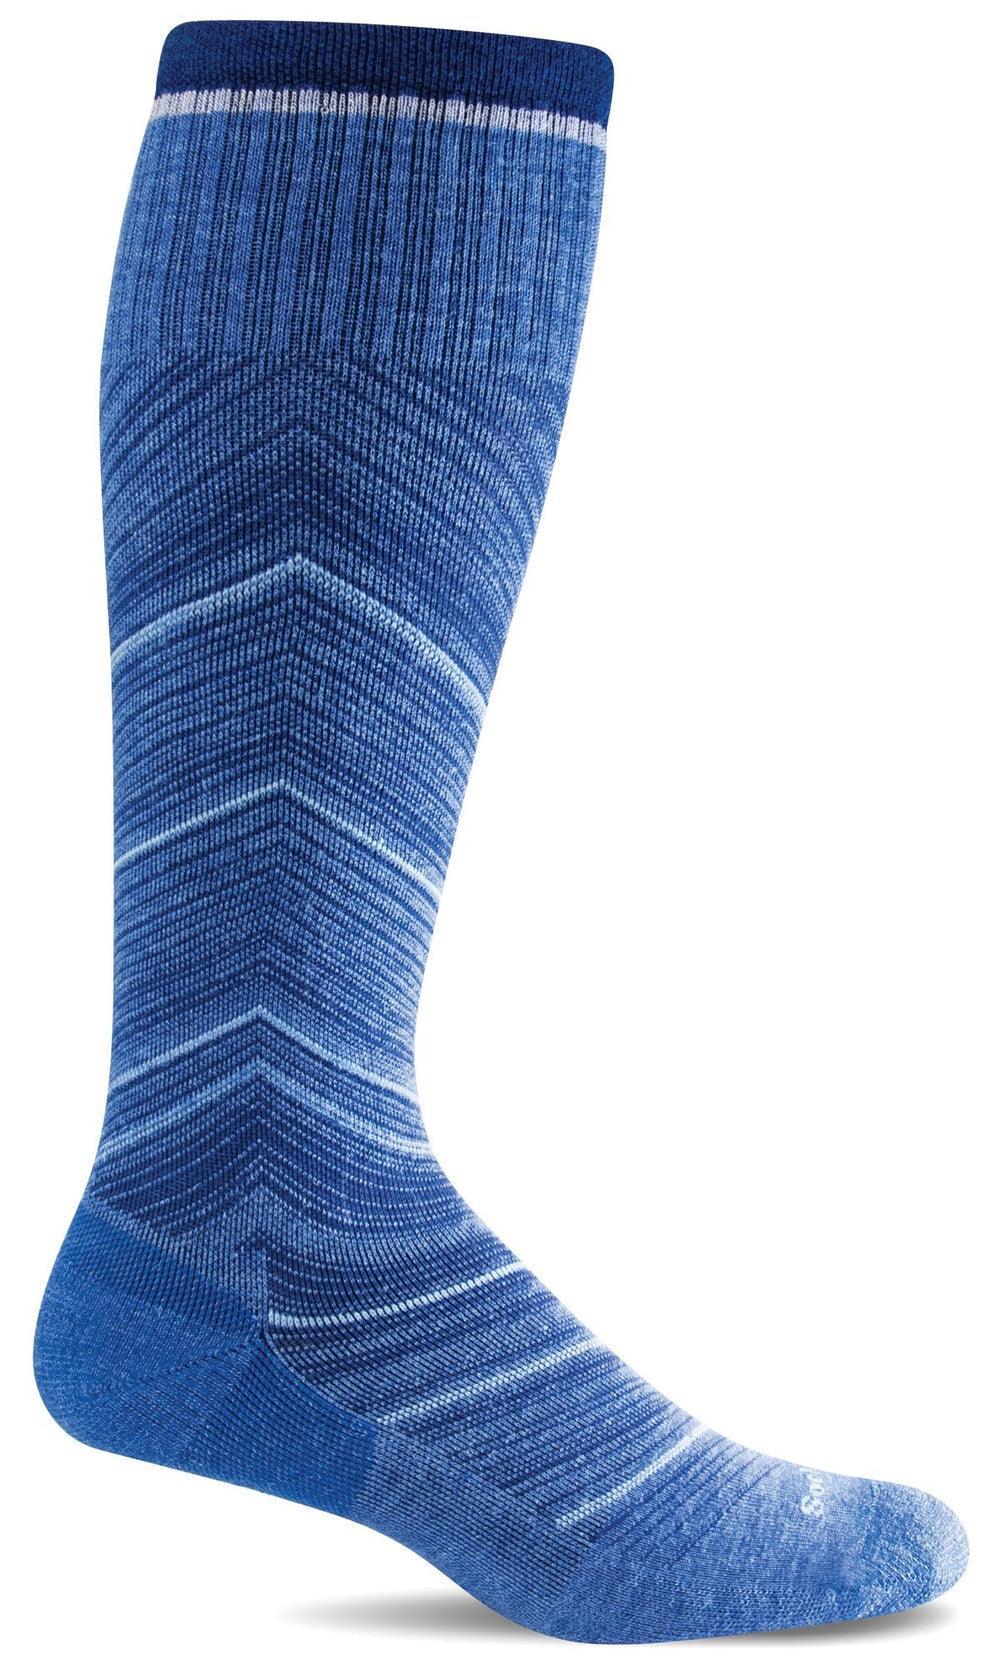 Full Flattery | Wide Calf Fit | Moderate Knee-high Compression - Sockwell - The Sock Monster